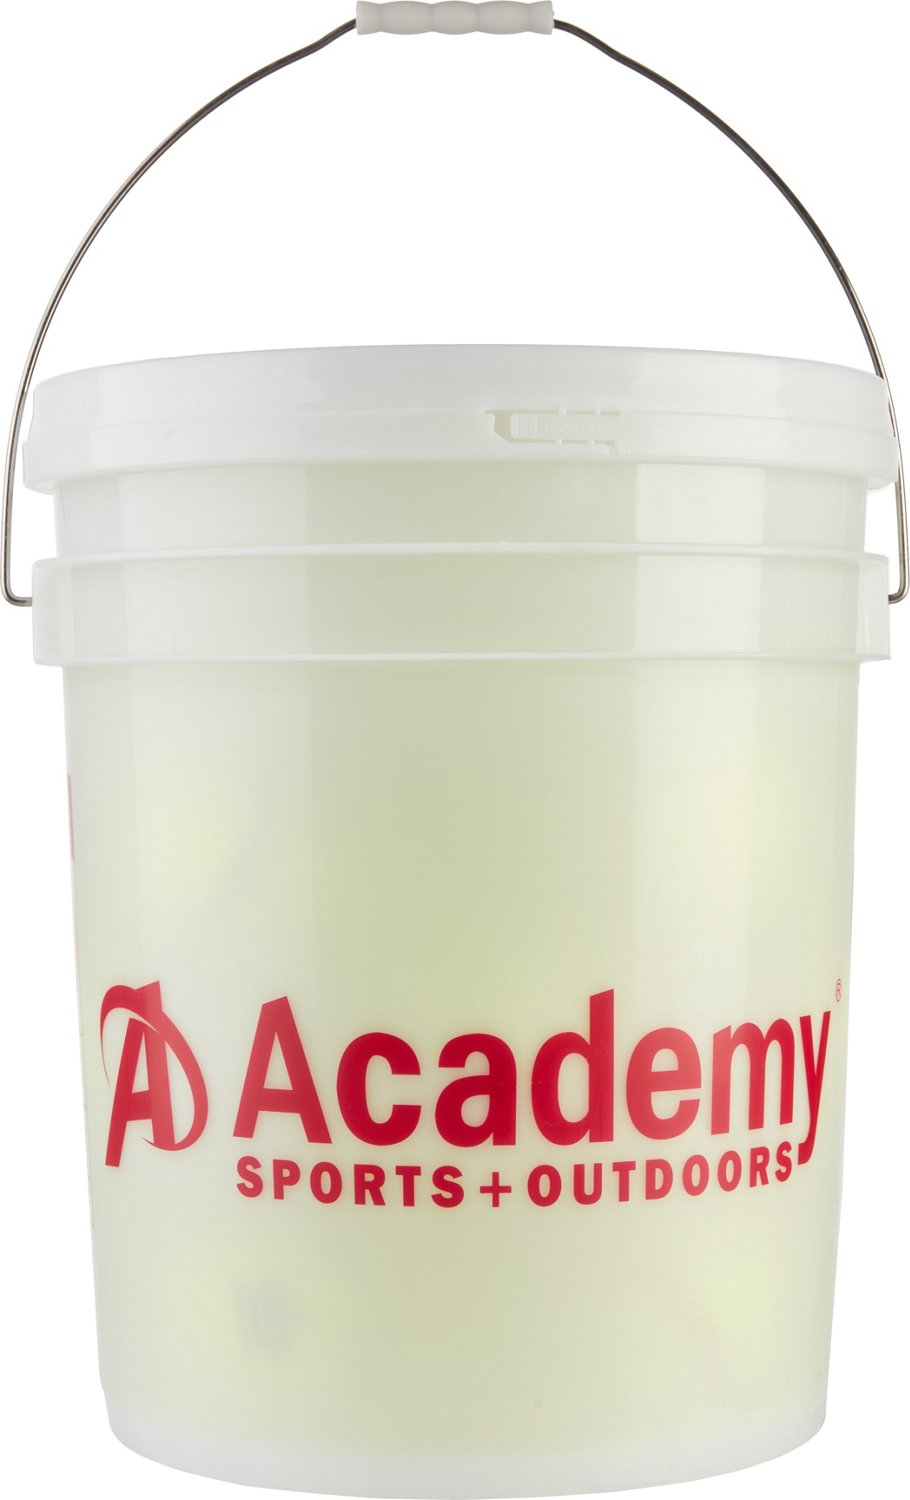 Academy Sports + Outdoors 12 in Fast-Pitch Practice Softballs 18-count Bucket